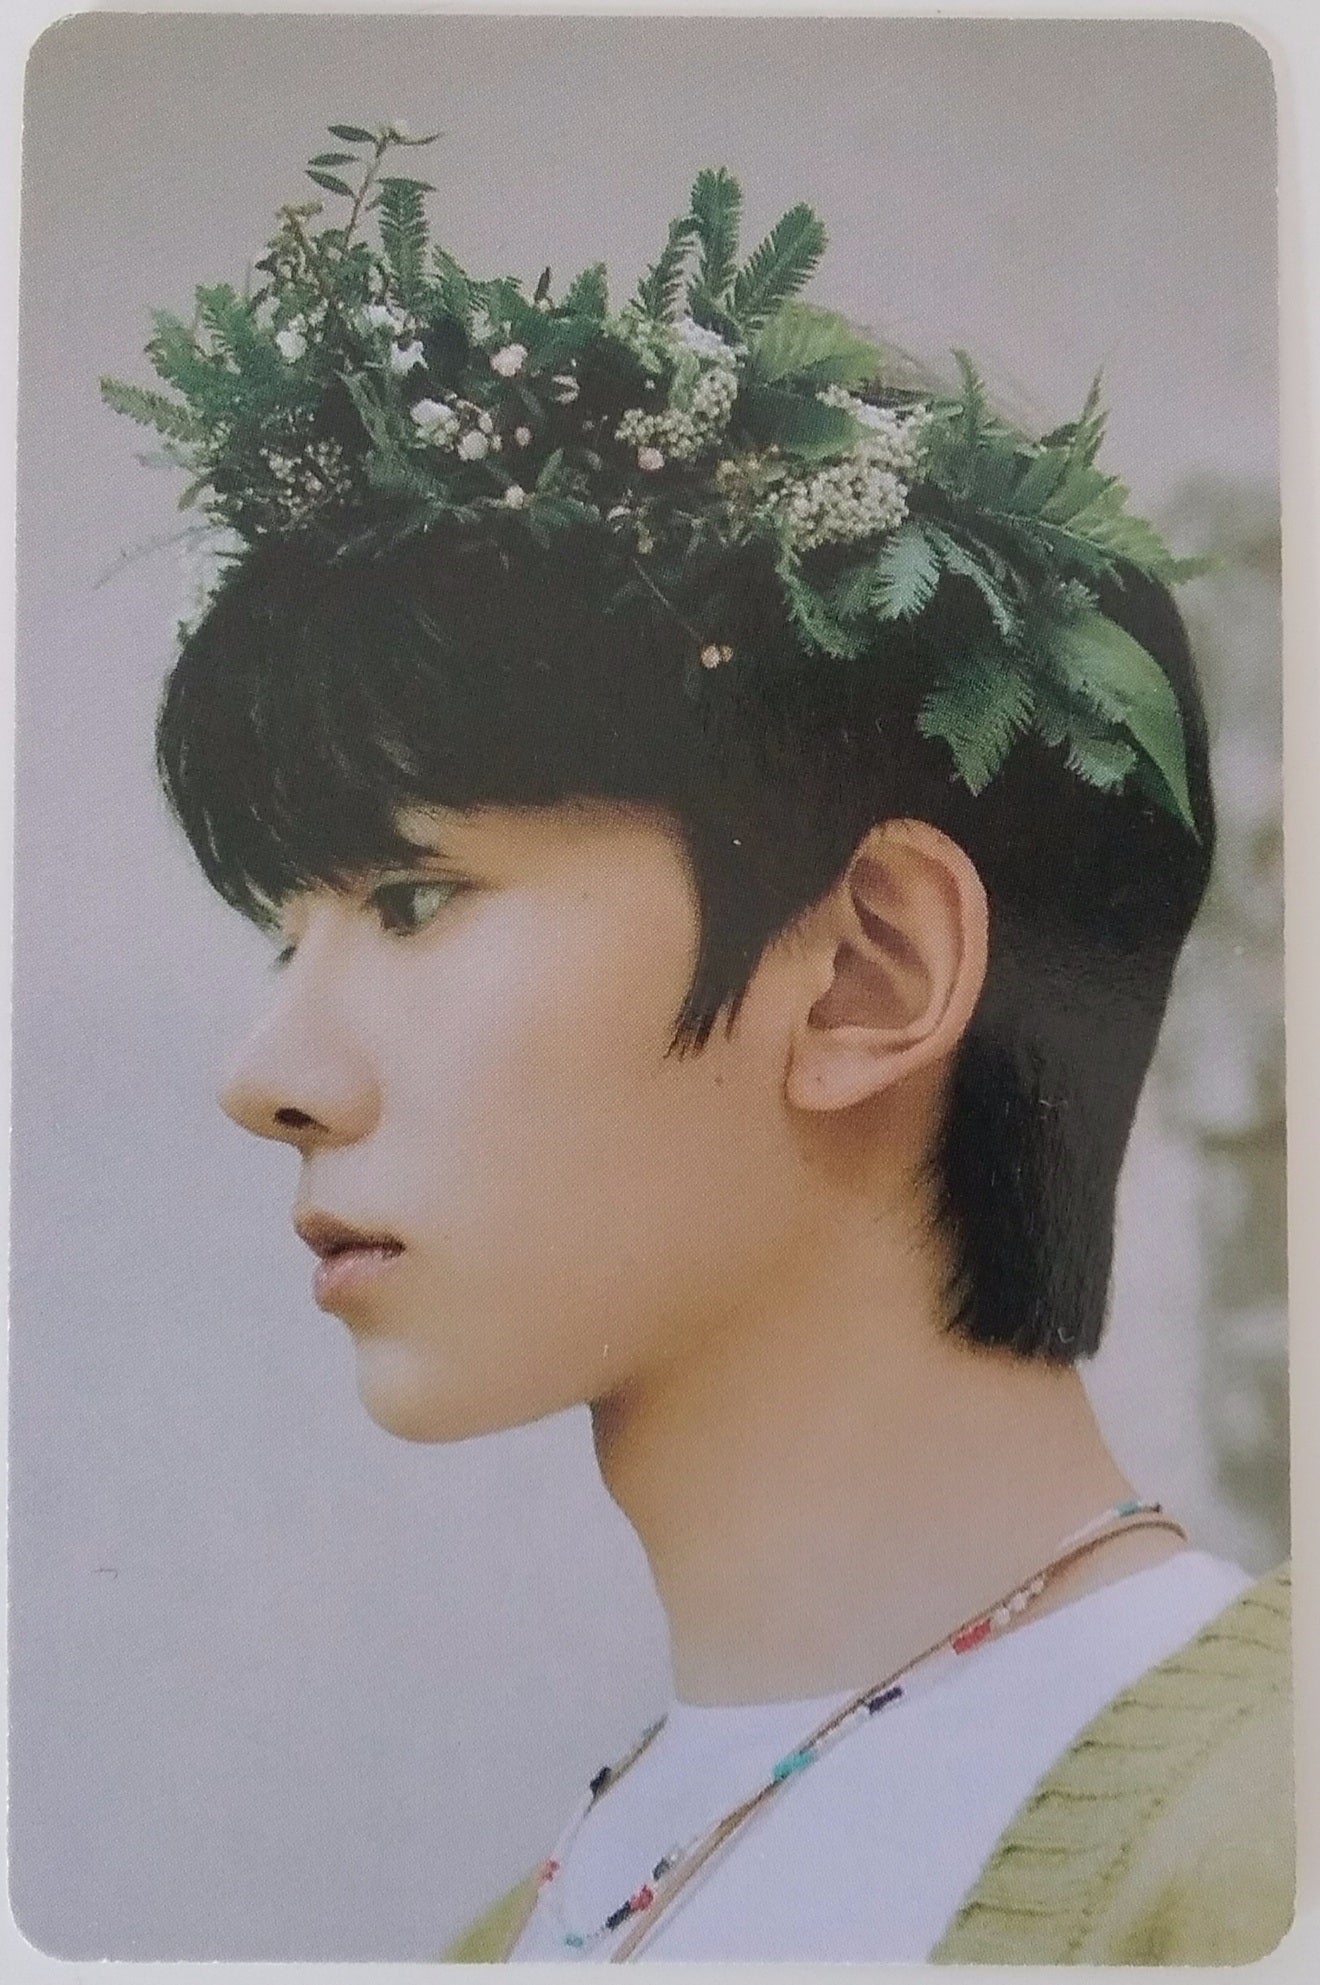 Photocard  ENHYPEN  Weather lab  Heeseung